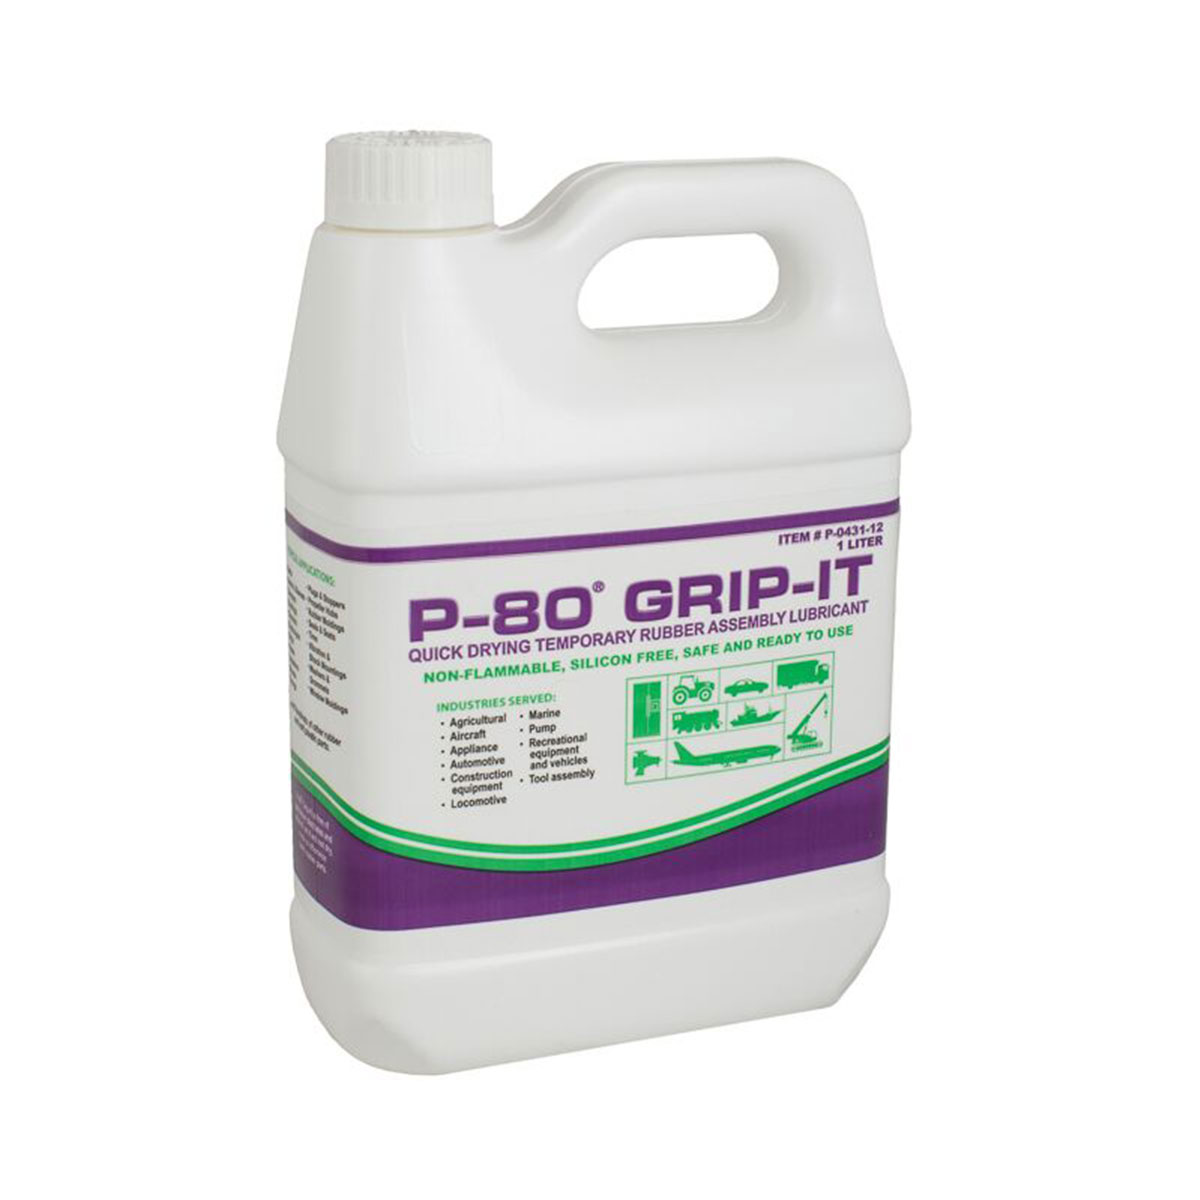 P-80 Grip-it Quick-Drying Temporary Lubricant - International